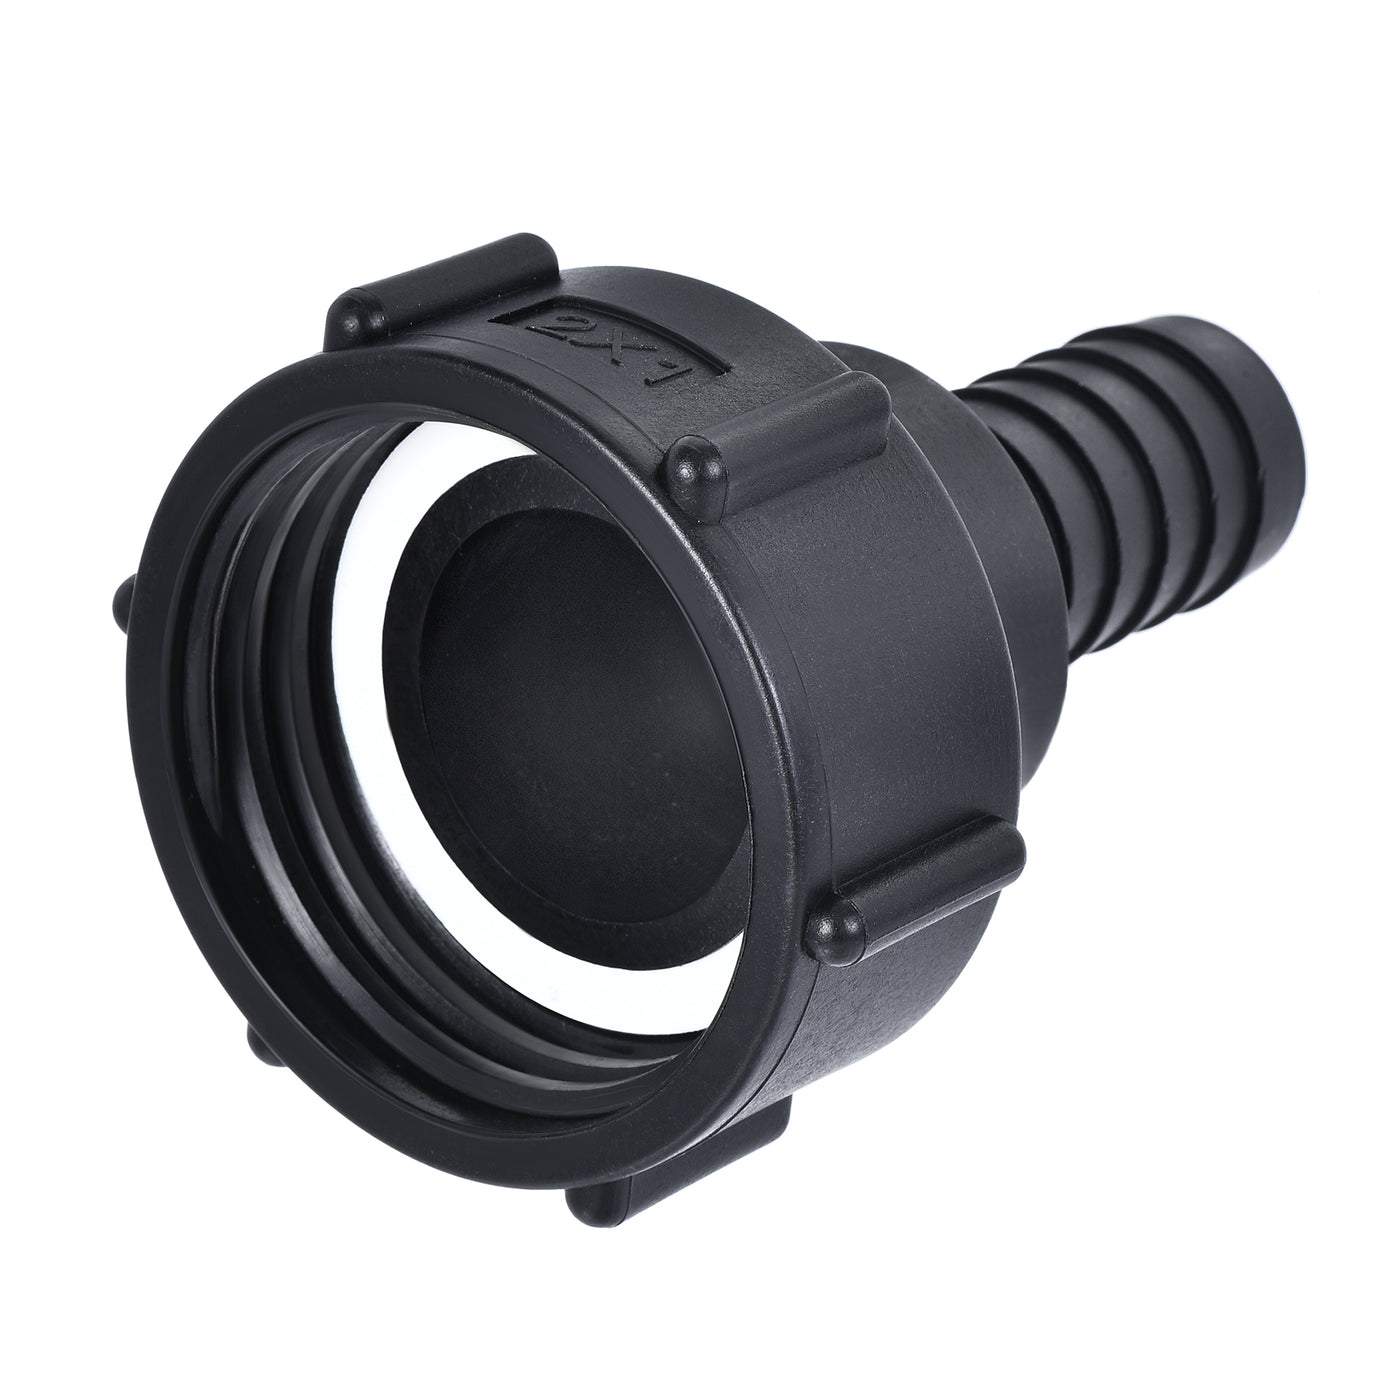 uxcell Uxcell ABS Hose Barb Fitting Coupler with Sealing Ring, mm Barb x G Female Thread Pipe Adapter, Black